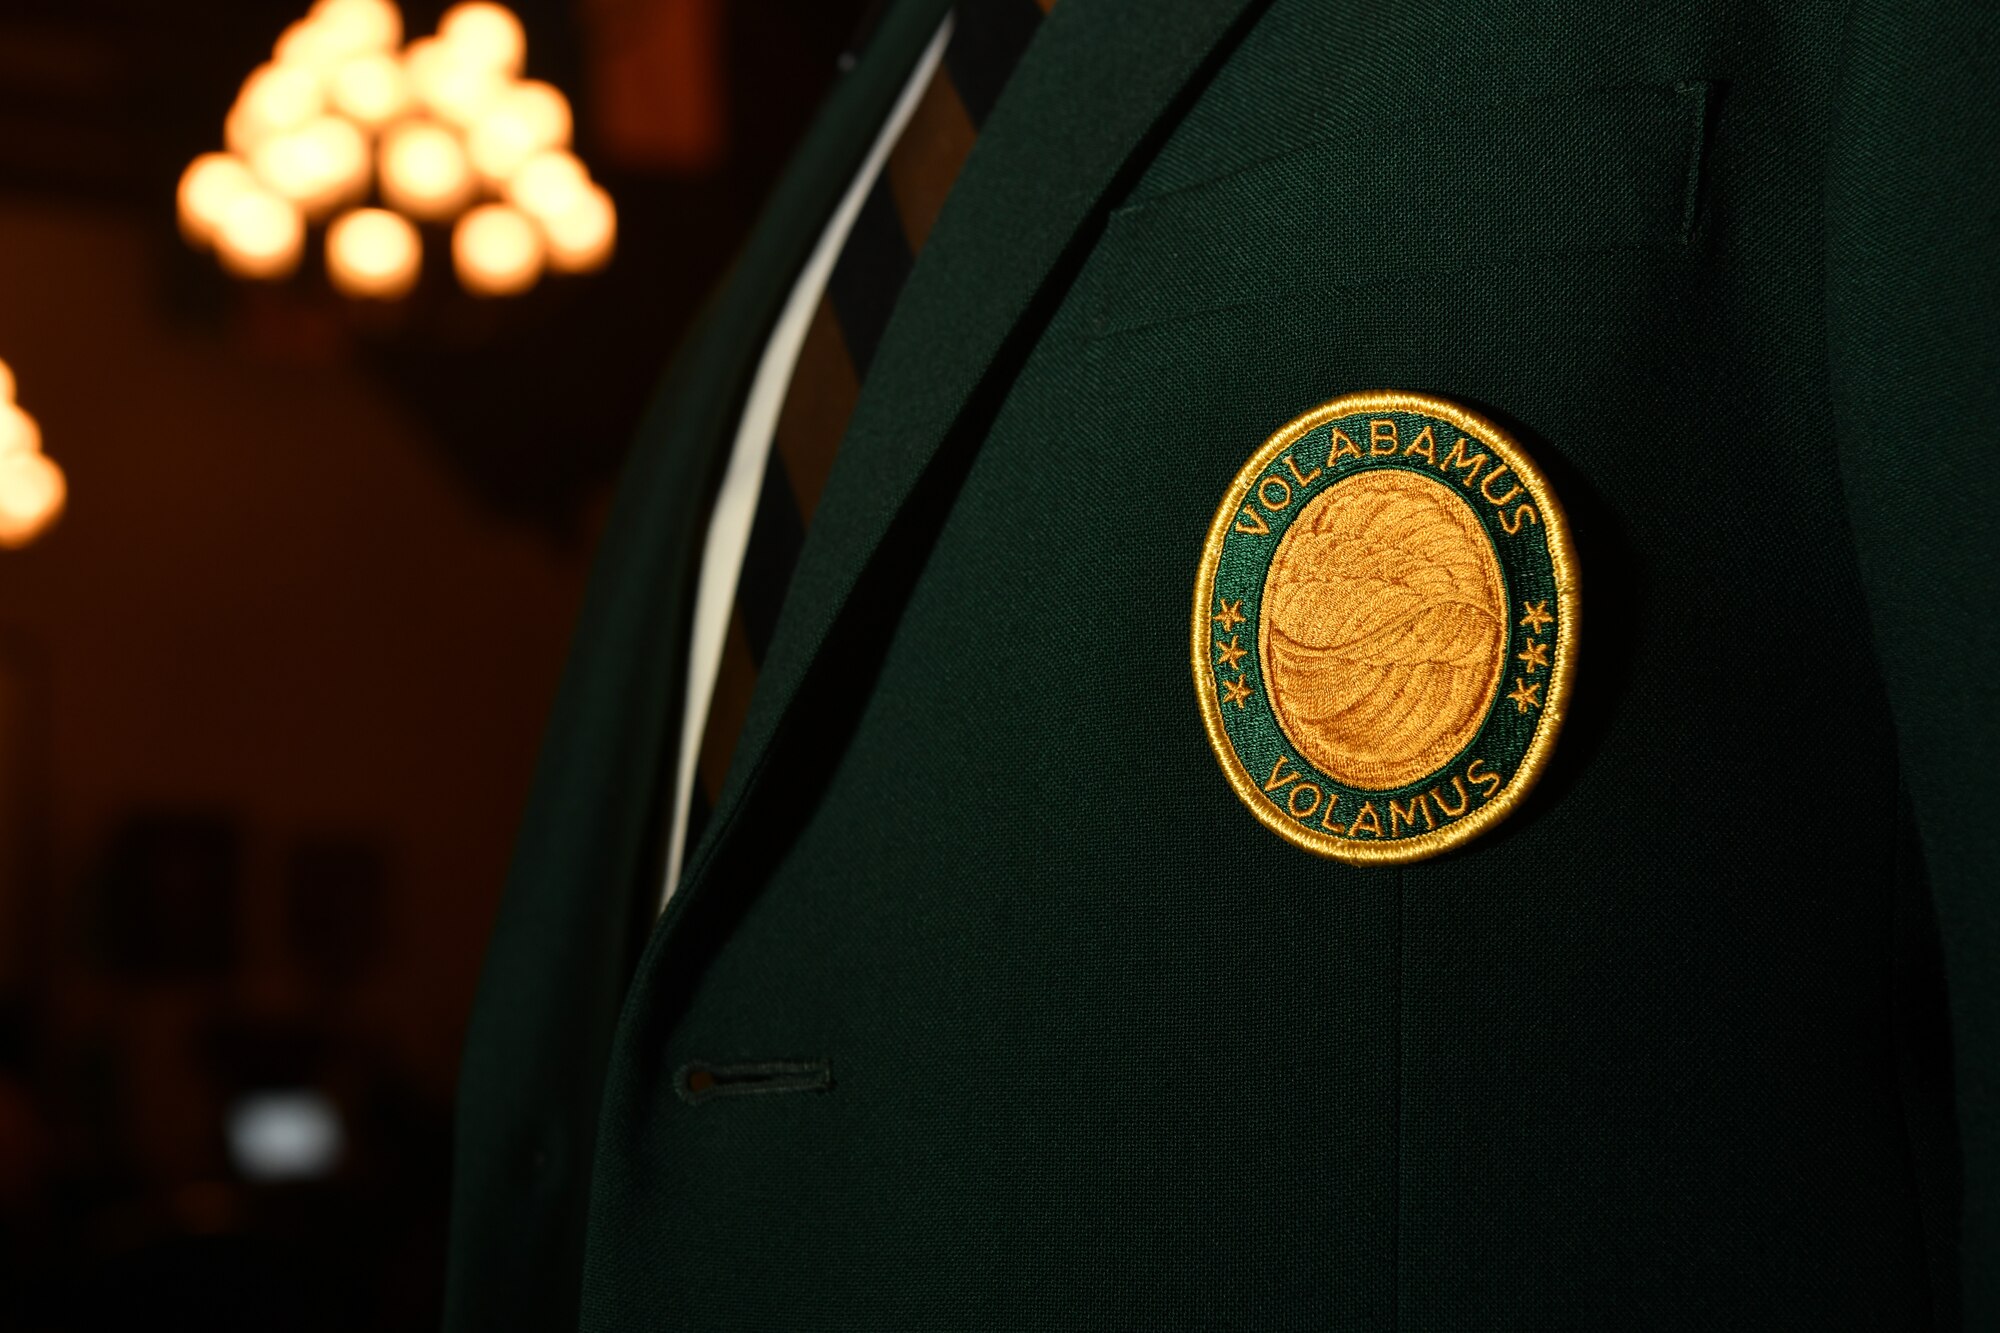 Retired Maj. Gen. Jerrold Allen, Daedalian national commander, wears a jacket bearing the Daedalian crest during an event at the Maxwell Club on Maxwell Air Force Base, Alabama, July 22, 2021. The event was held to honor James “Jimmy” Stewart’s military service as an aviator and recognize him as a Daedalian Distinguished Colleague.